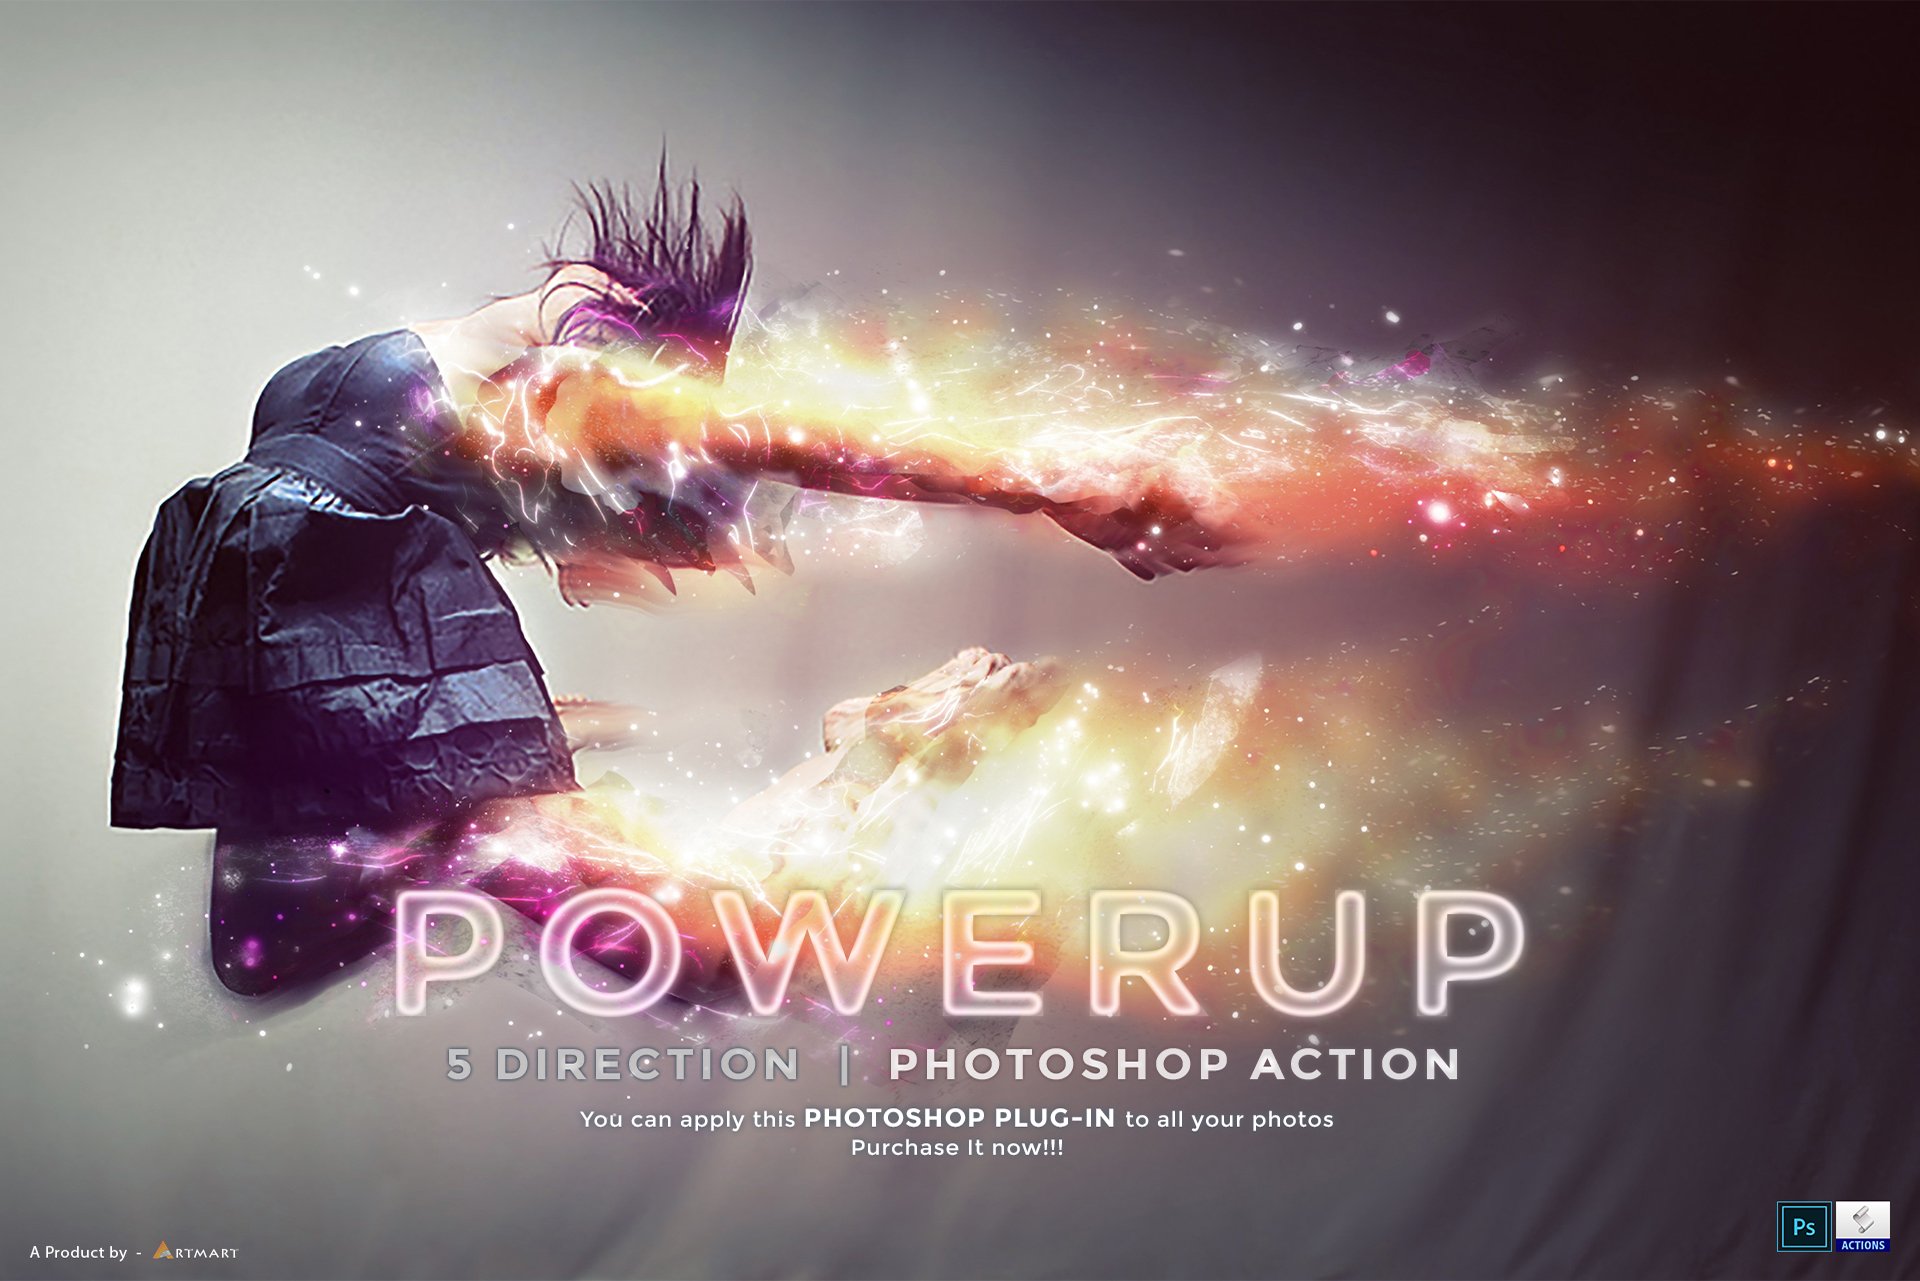 10 power up photoshop action 28129 449